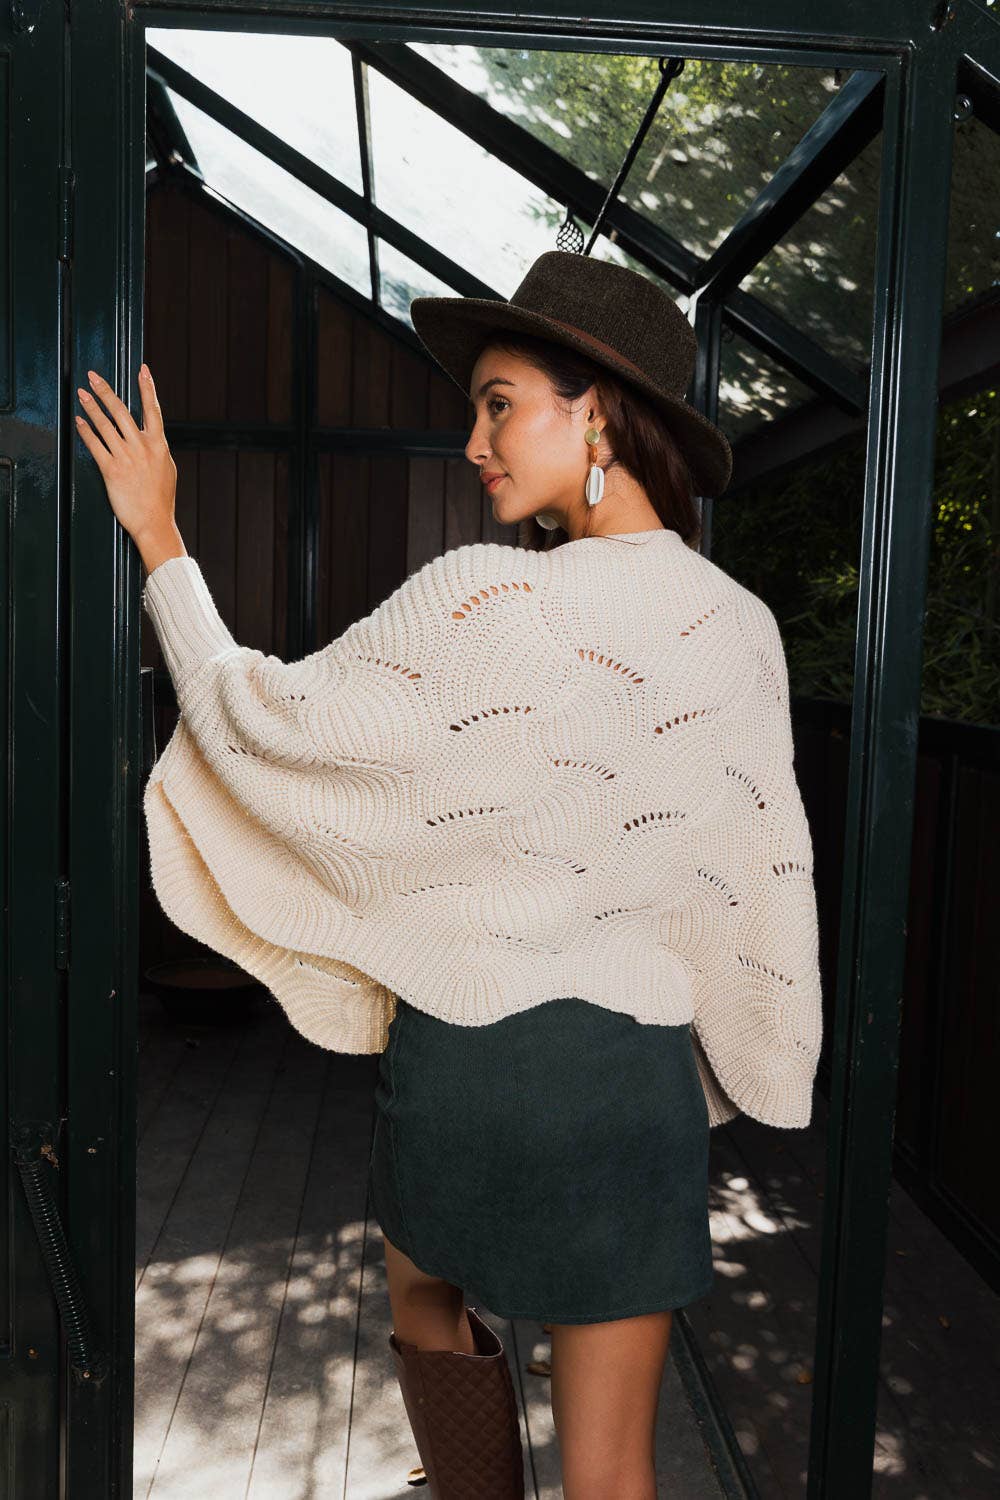 Ribbed Knit Pattern Poncho w/ Sleeves - Whimsical Details